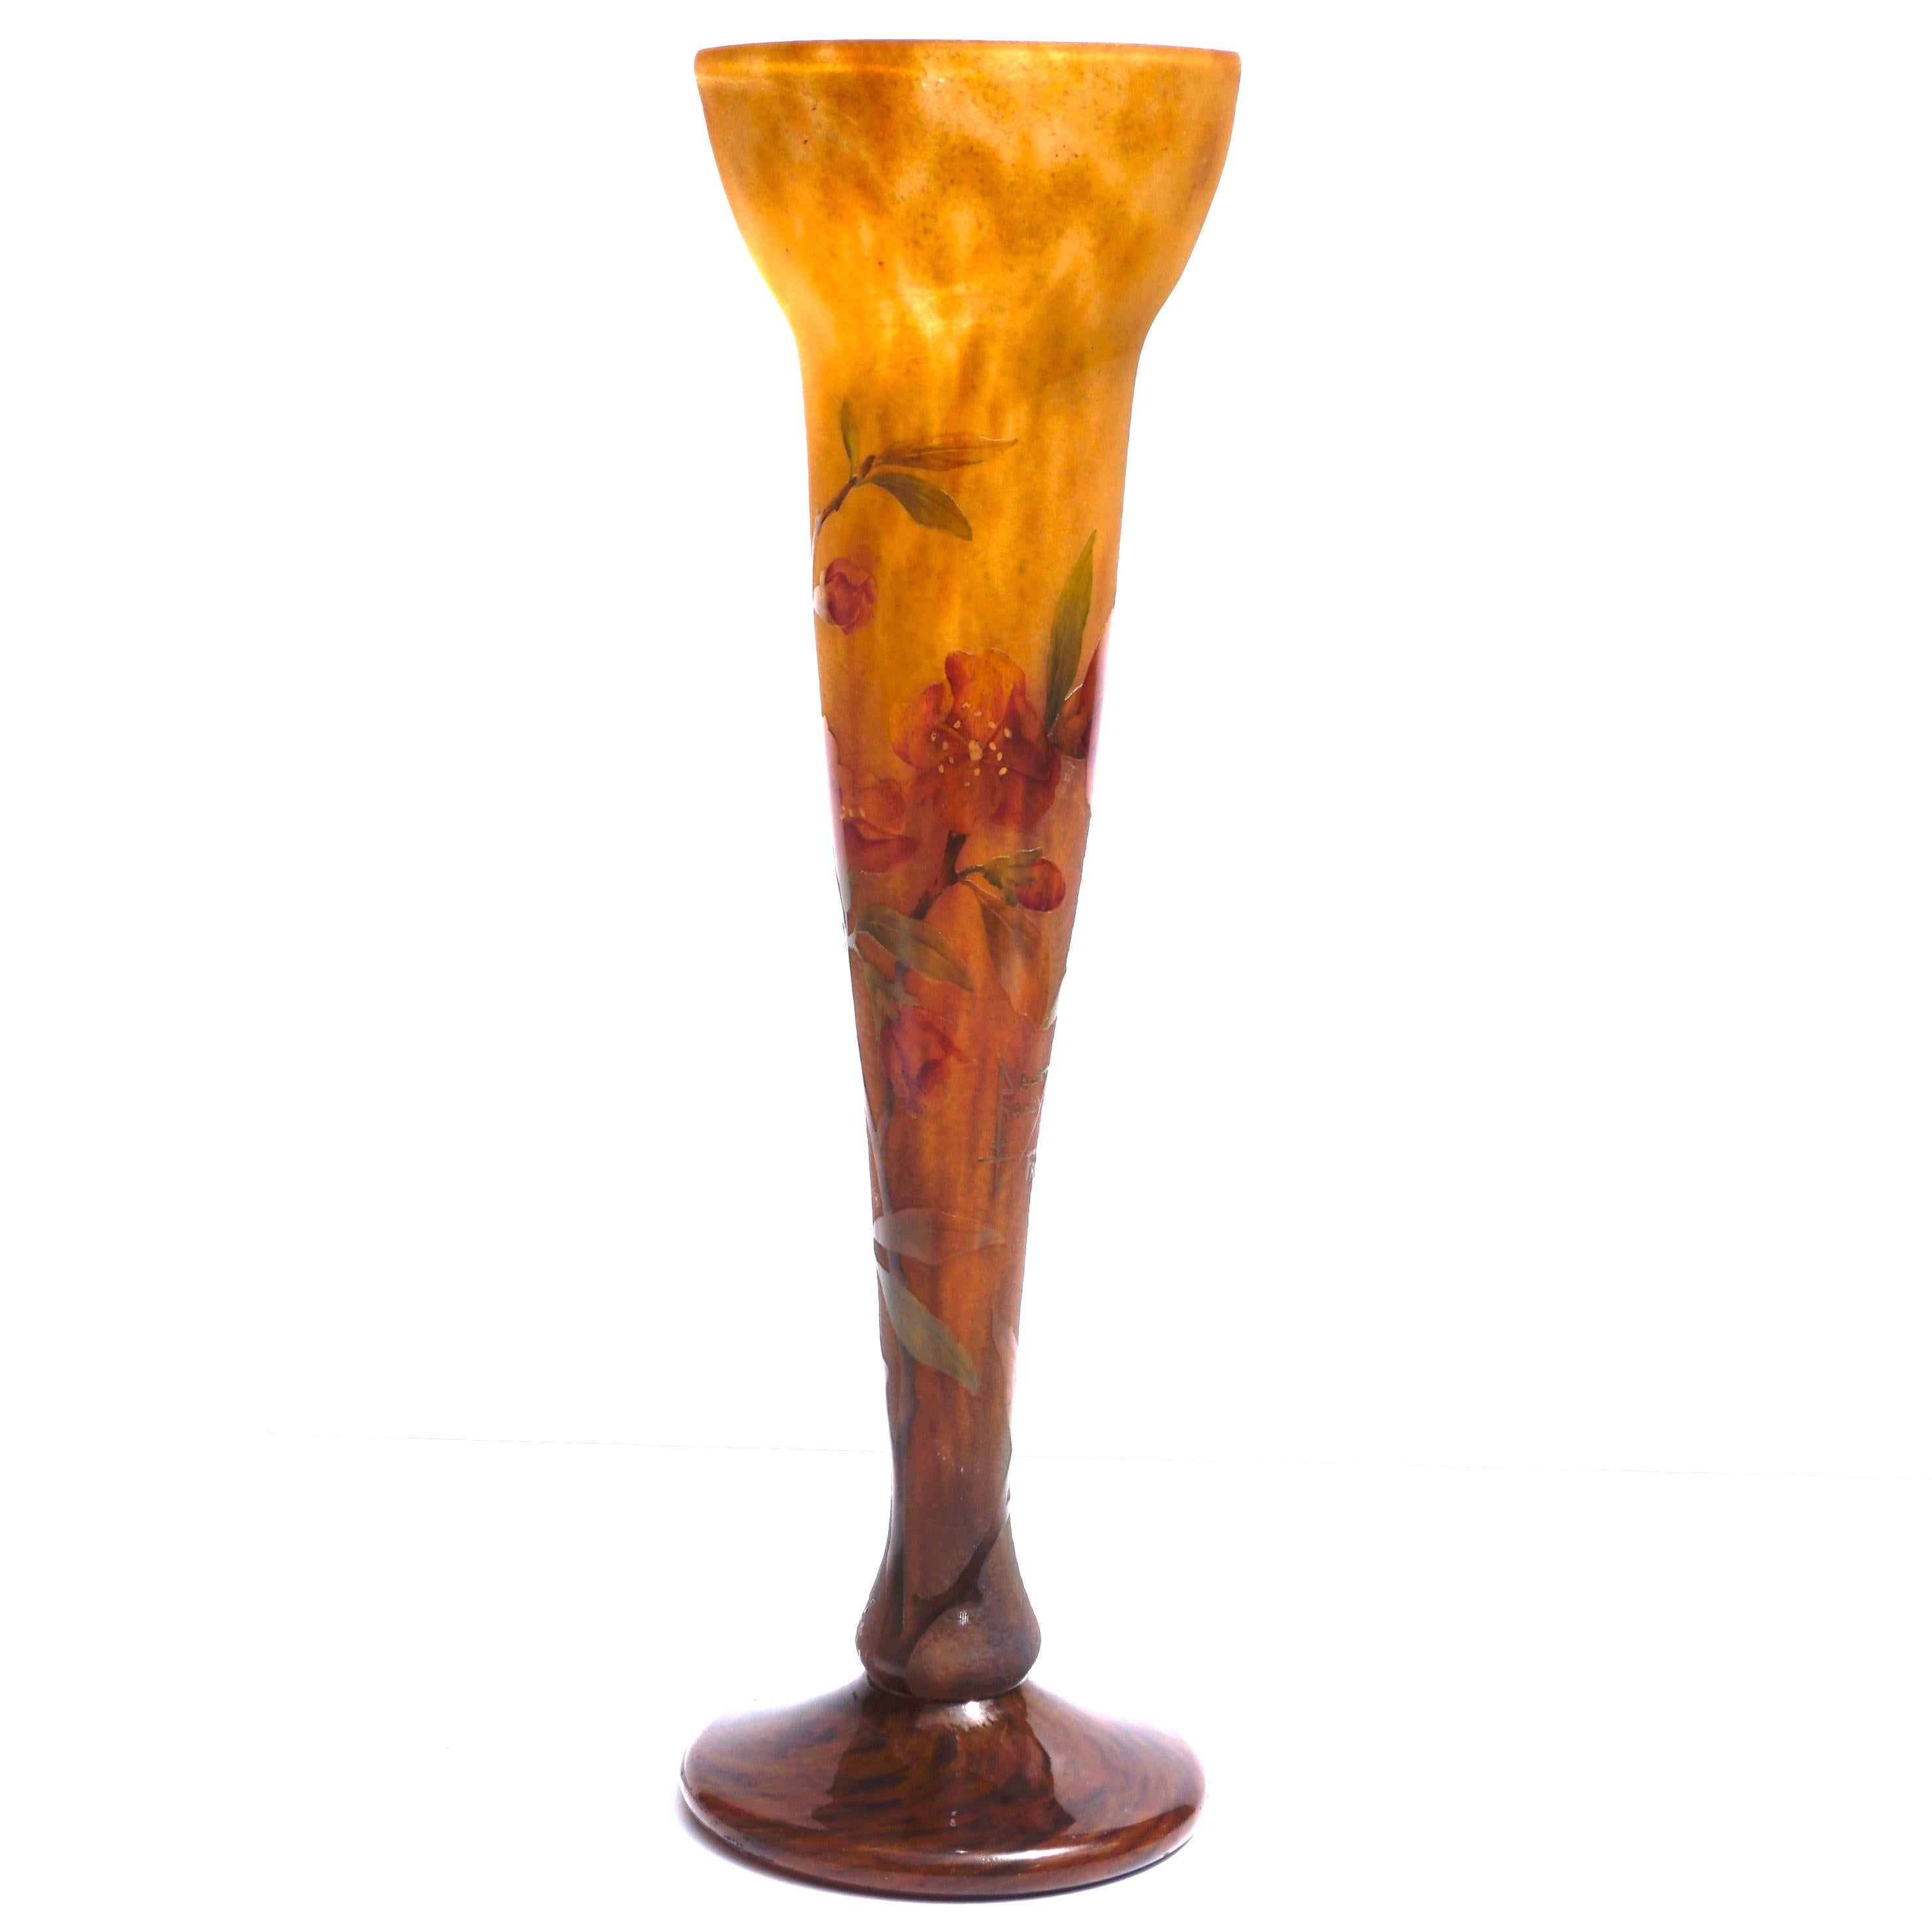 A magnificent Acid etched and enameled Daum Nancy vast standing at 14.25 Inches tall. Superb red exotic flowers with green leaves on brown stems are raised by wheel carving and acid etching upon the yellow and orange variegated background. A